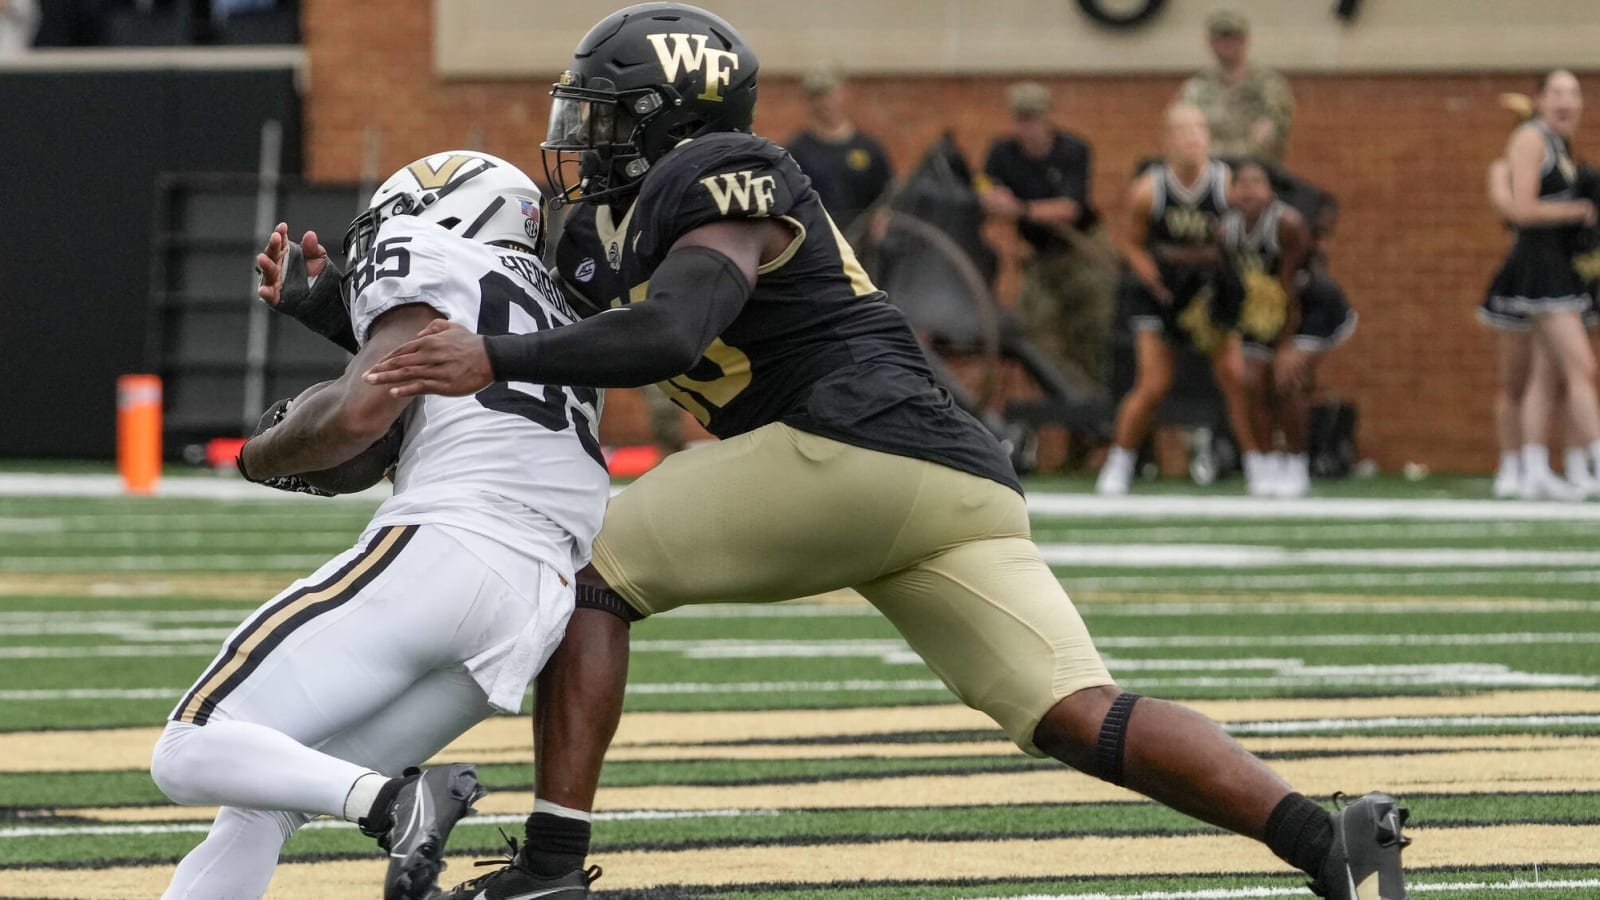 Wake Forest transfer DB confirms he is in Tuscaloosa to visit Alabama